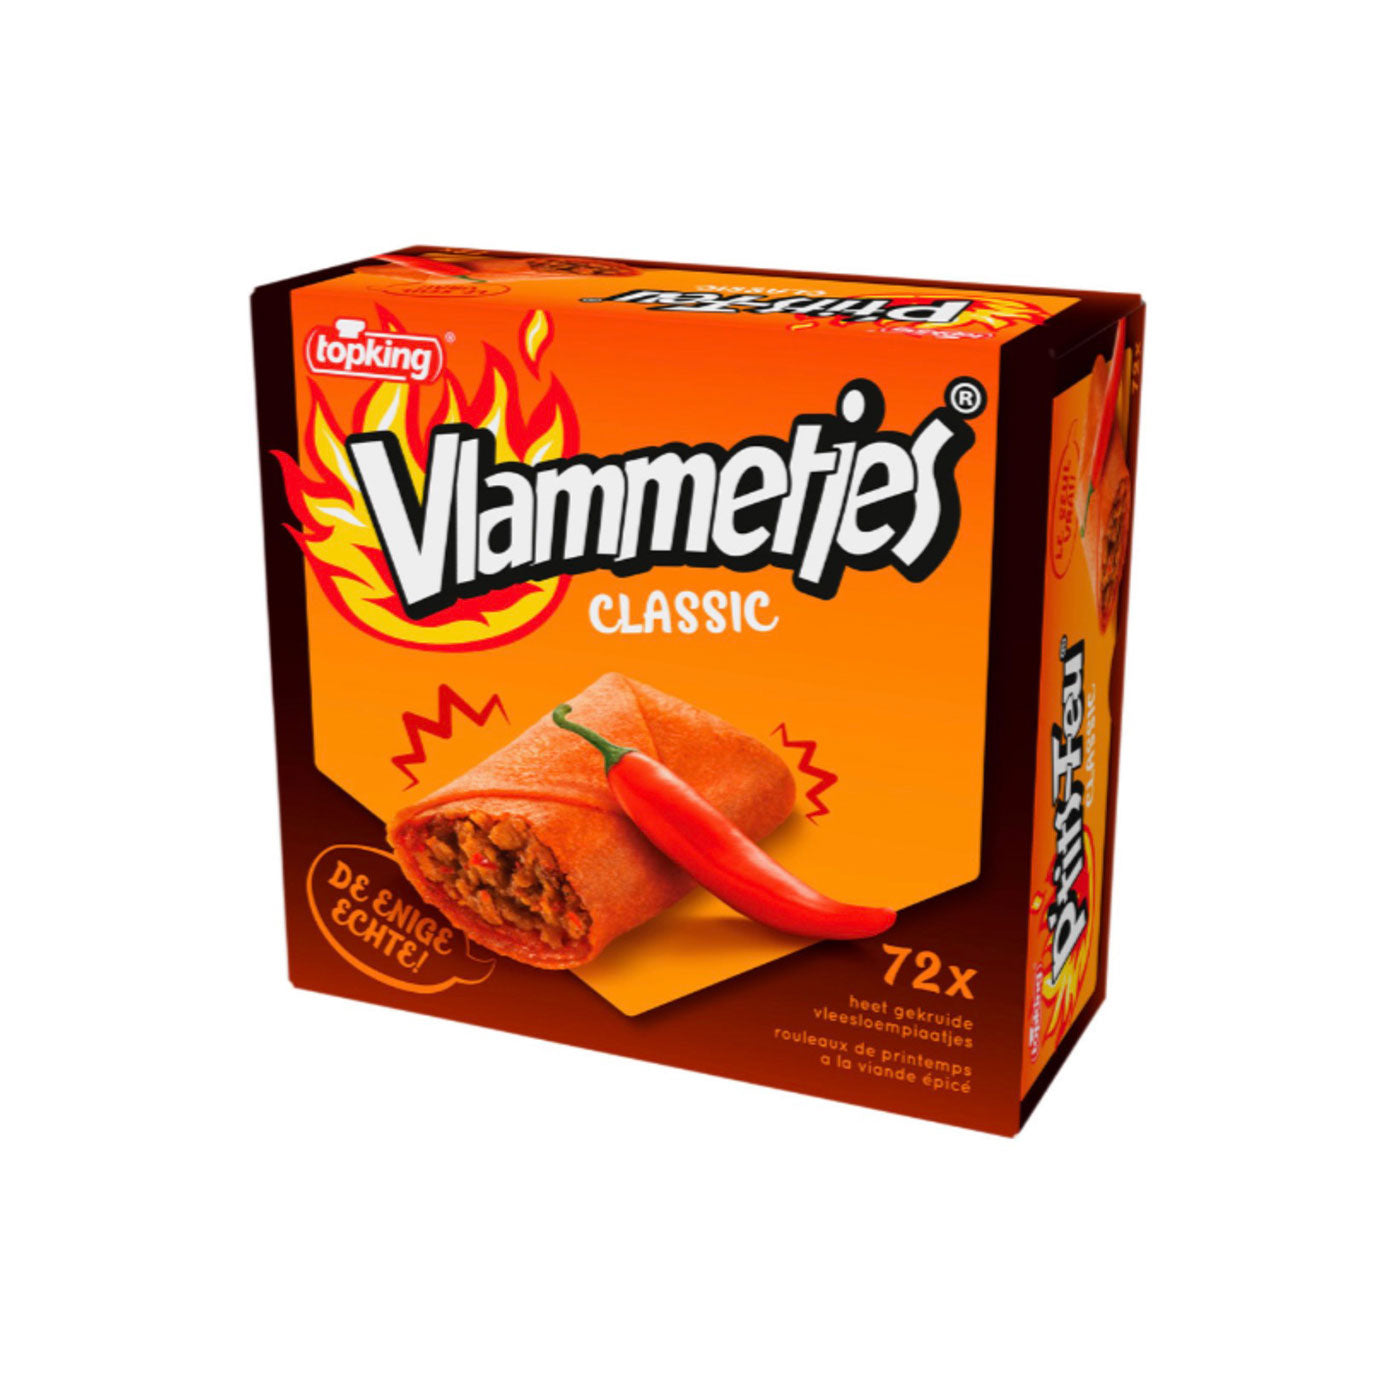 Vlammetjes Spicy Meat Spring Rolls - 72x18g - Authentic Dutch Snack - Perfect Starter Or Party Bite! - Image 1